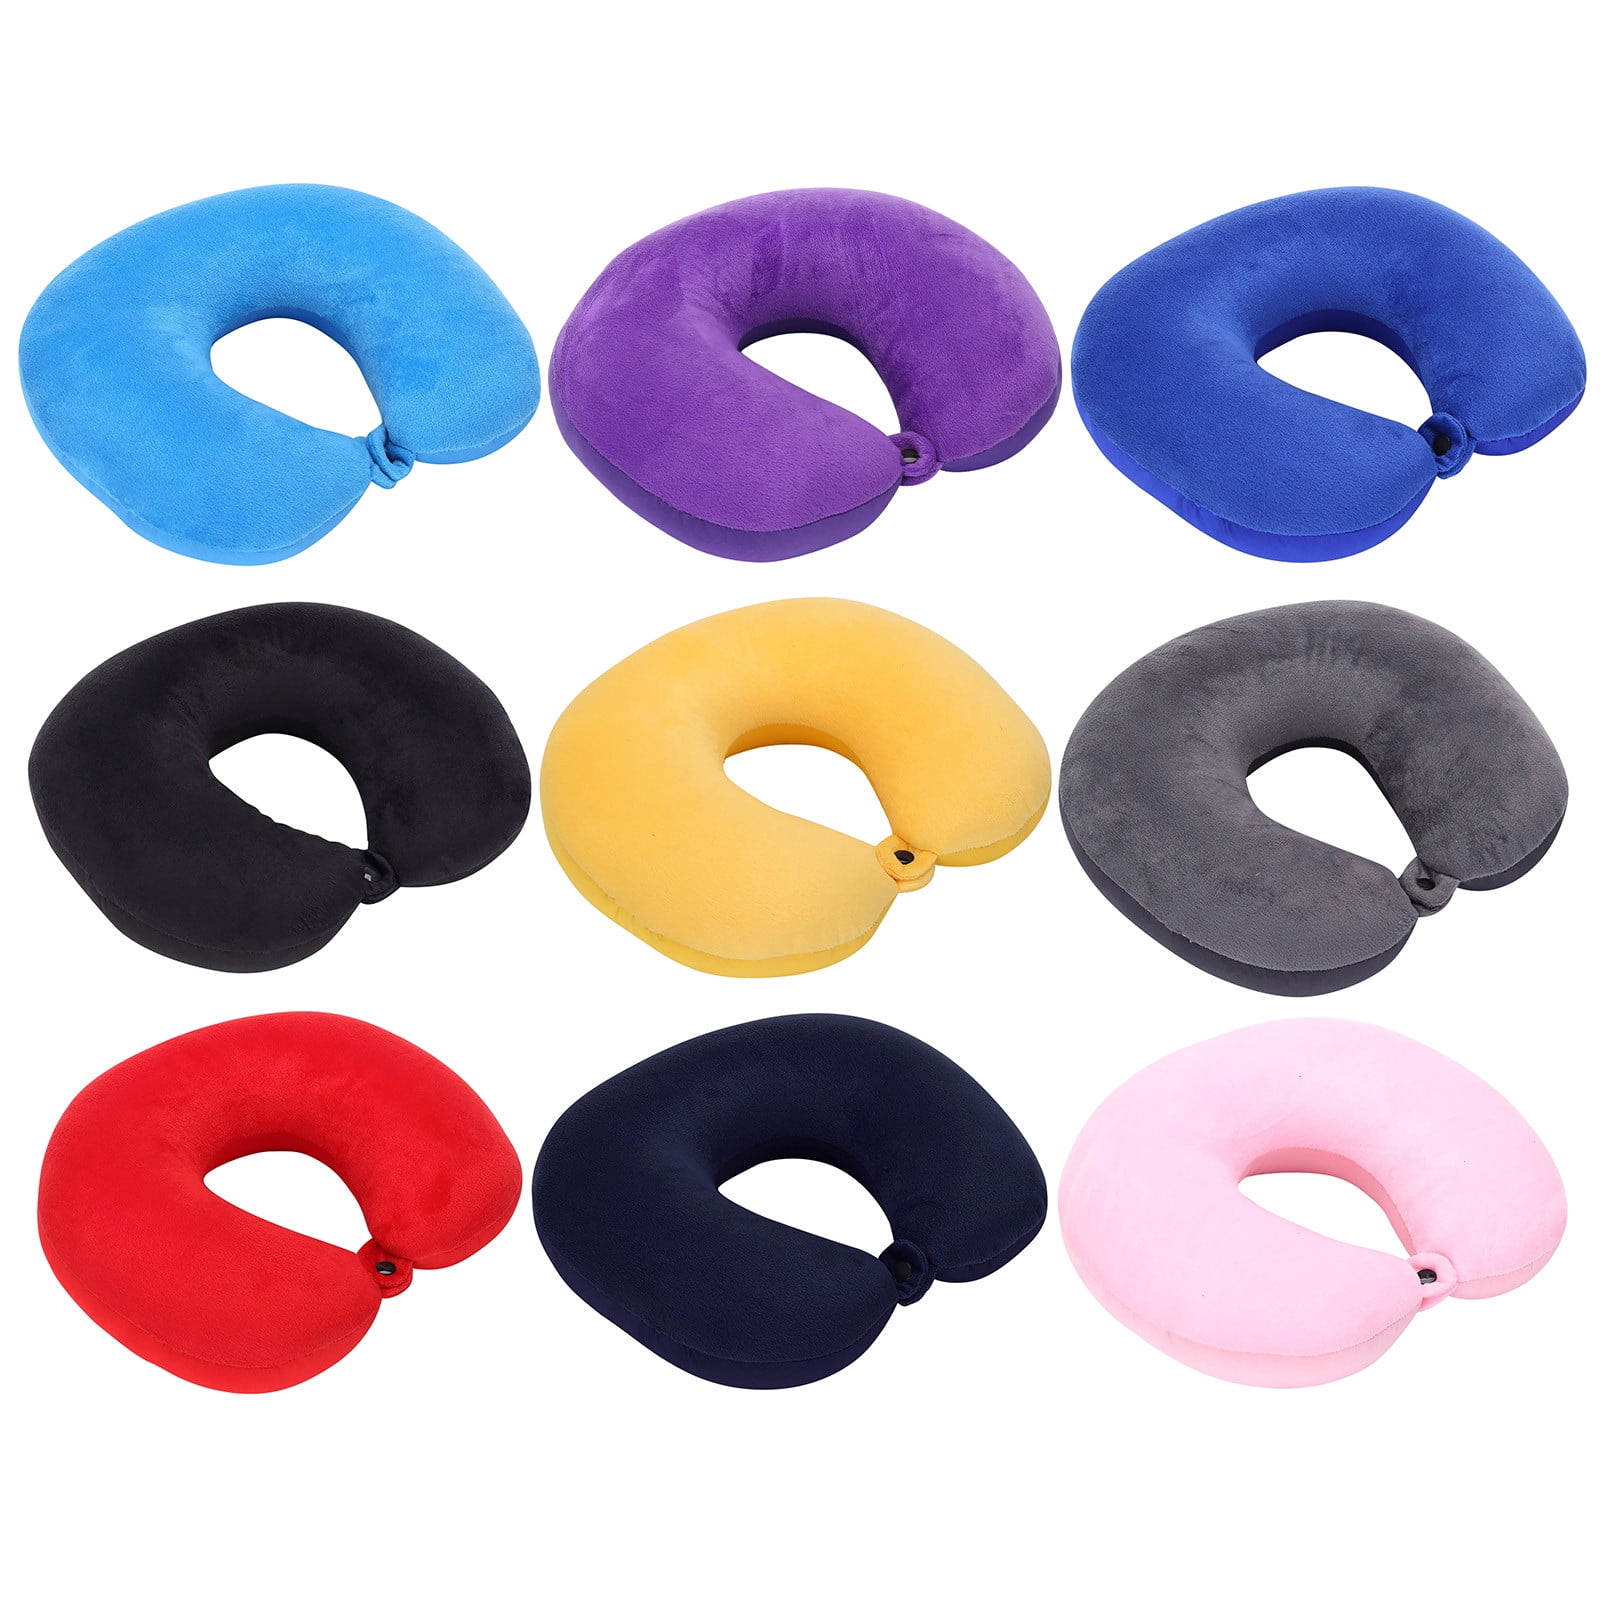 Wefuesd Travel Neck Pillow Memory Foam Airplane Travel Comfortable Washable  Cover Plane Neck Support Pillow For Neck Sleeping, Seat Cushion, Living